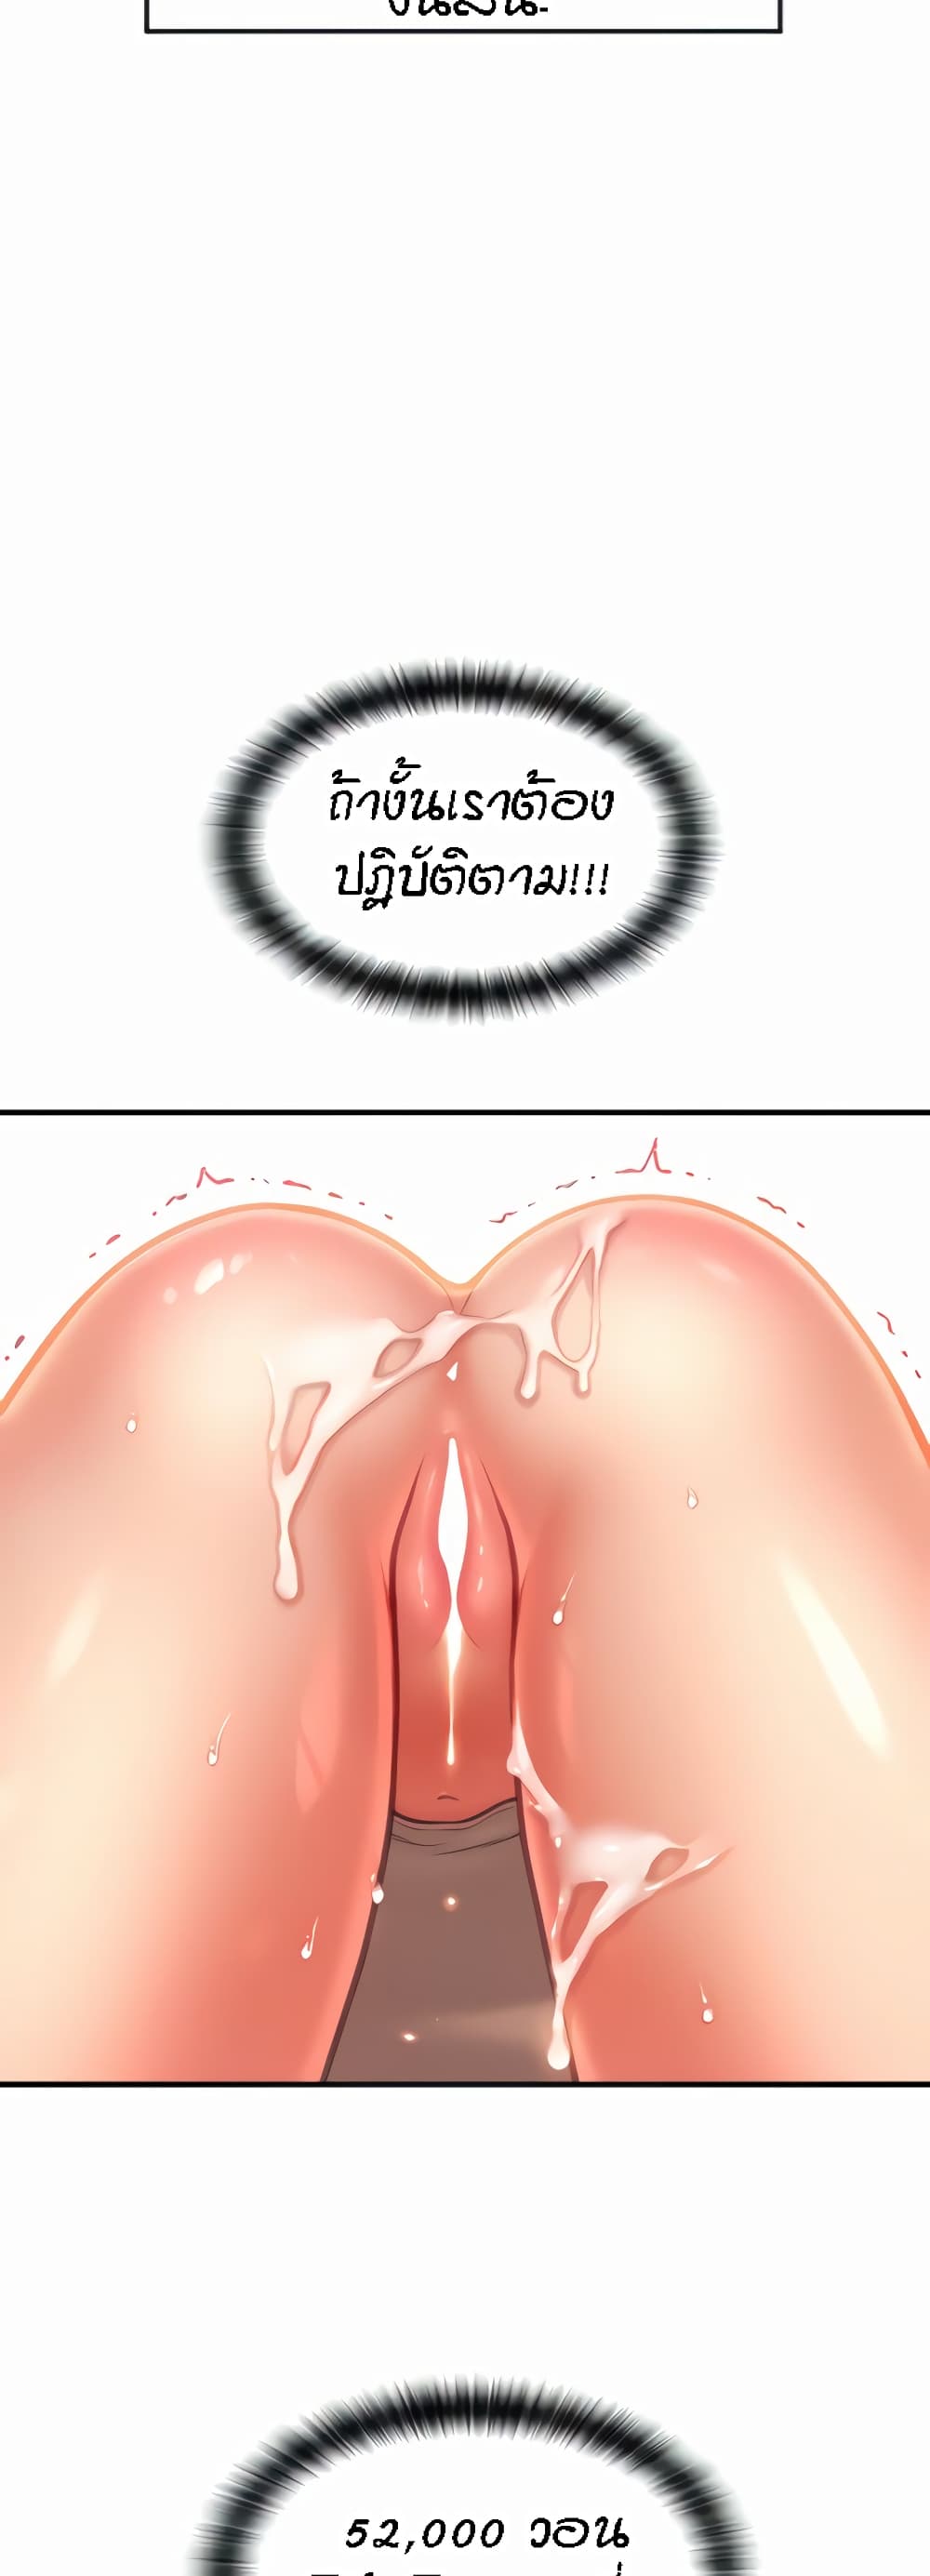 Pay with Sperm Pay 7 (7)